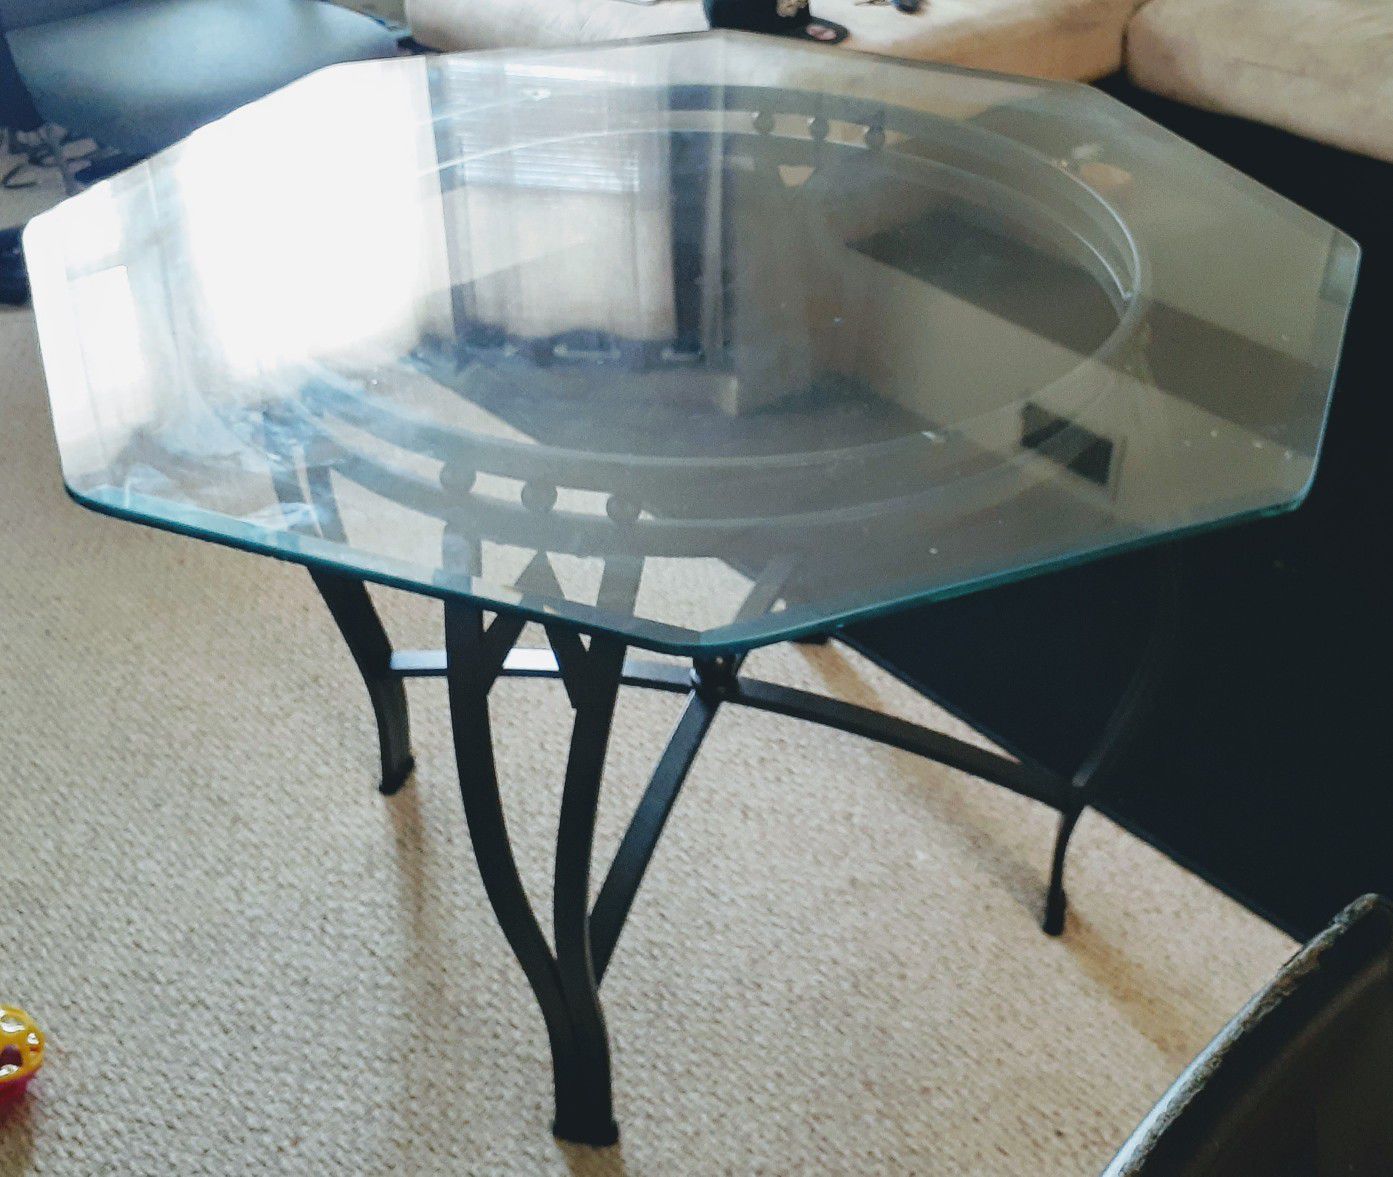 Small glass table